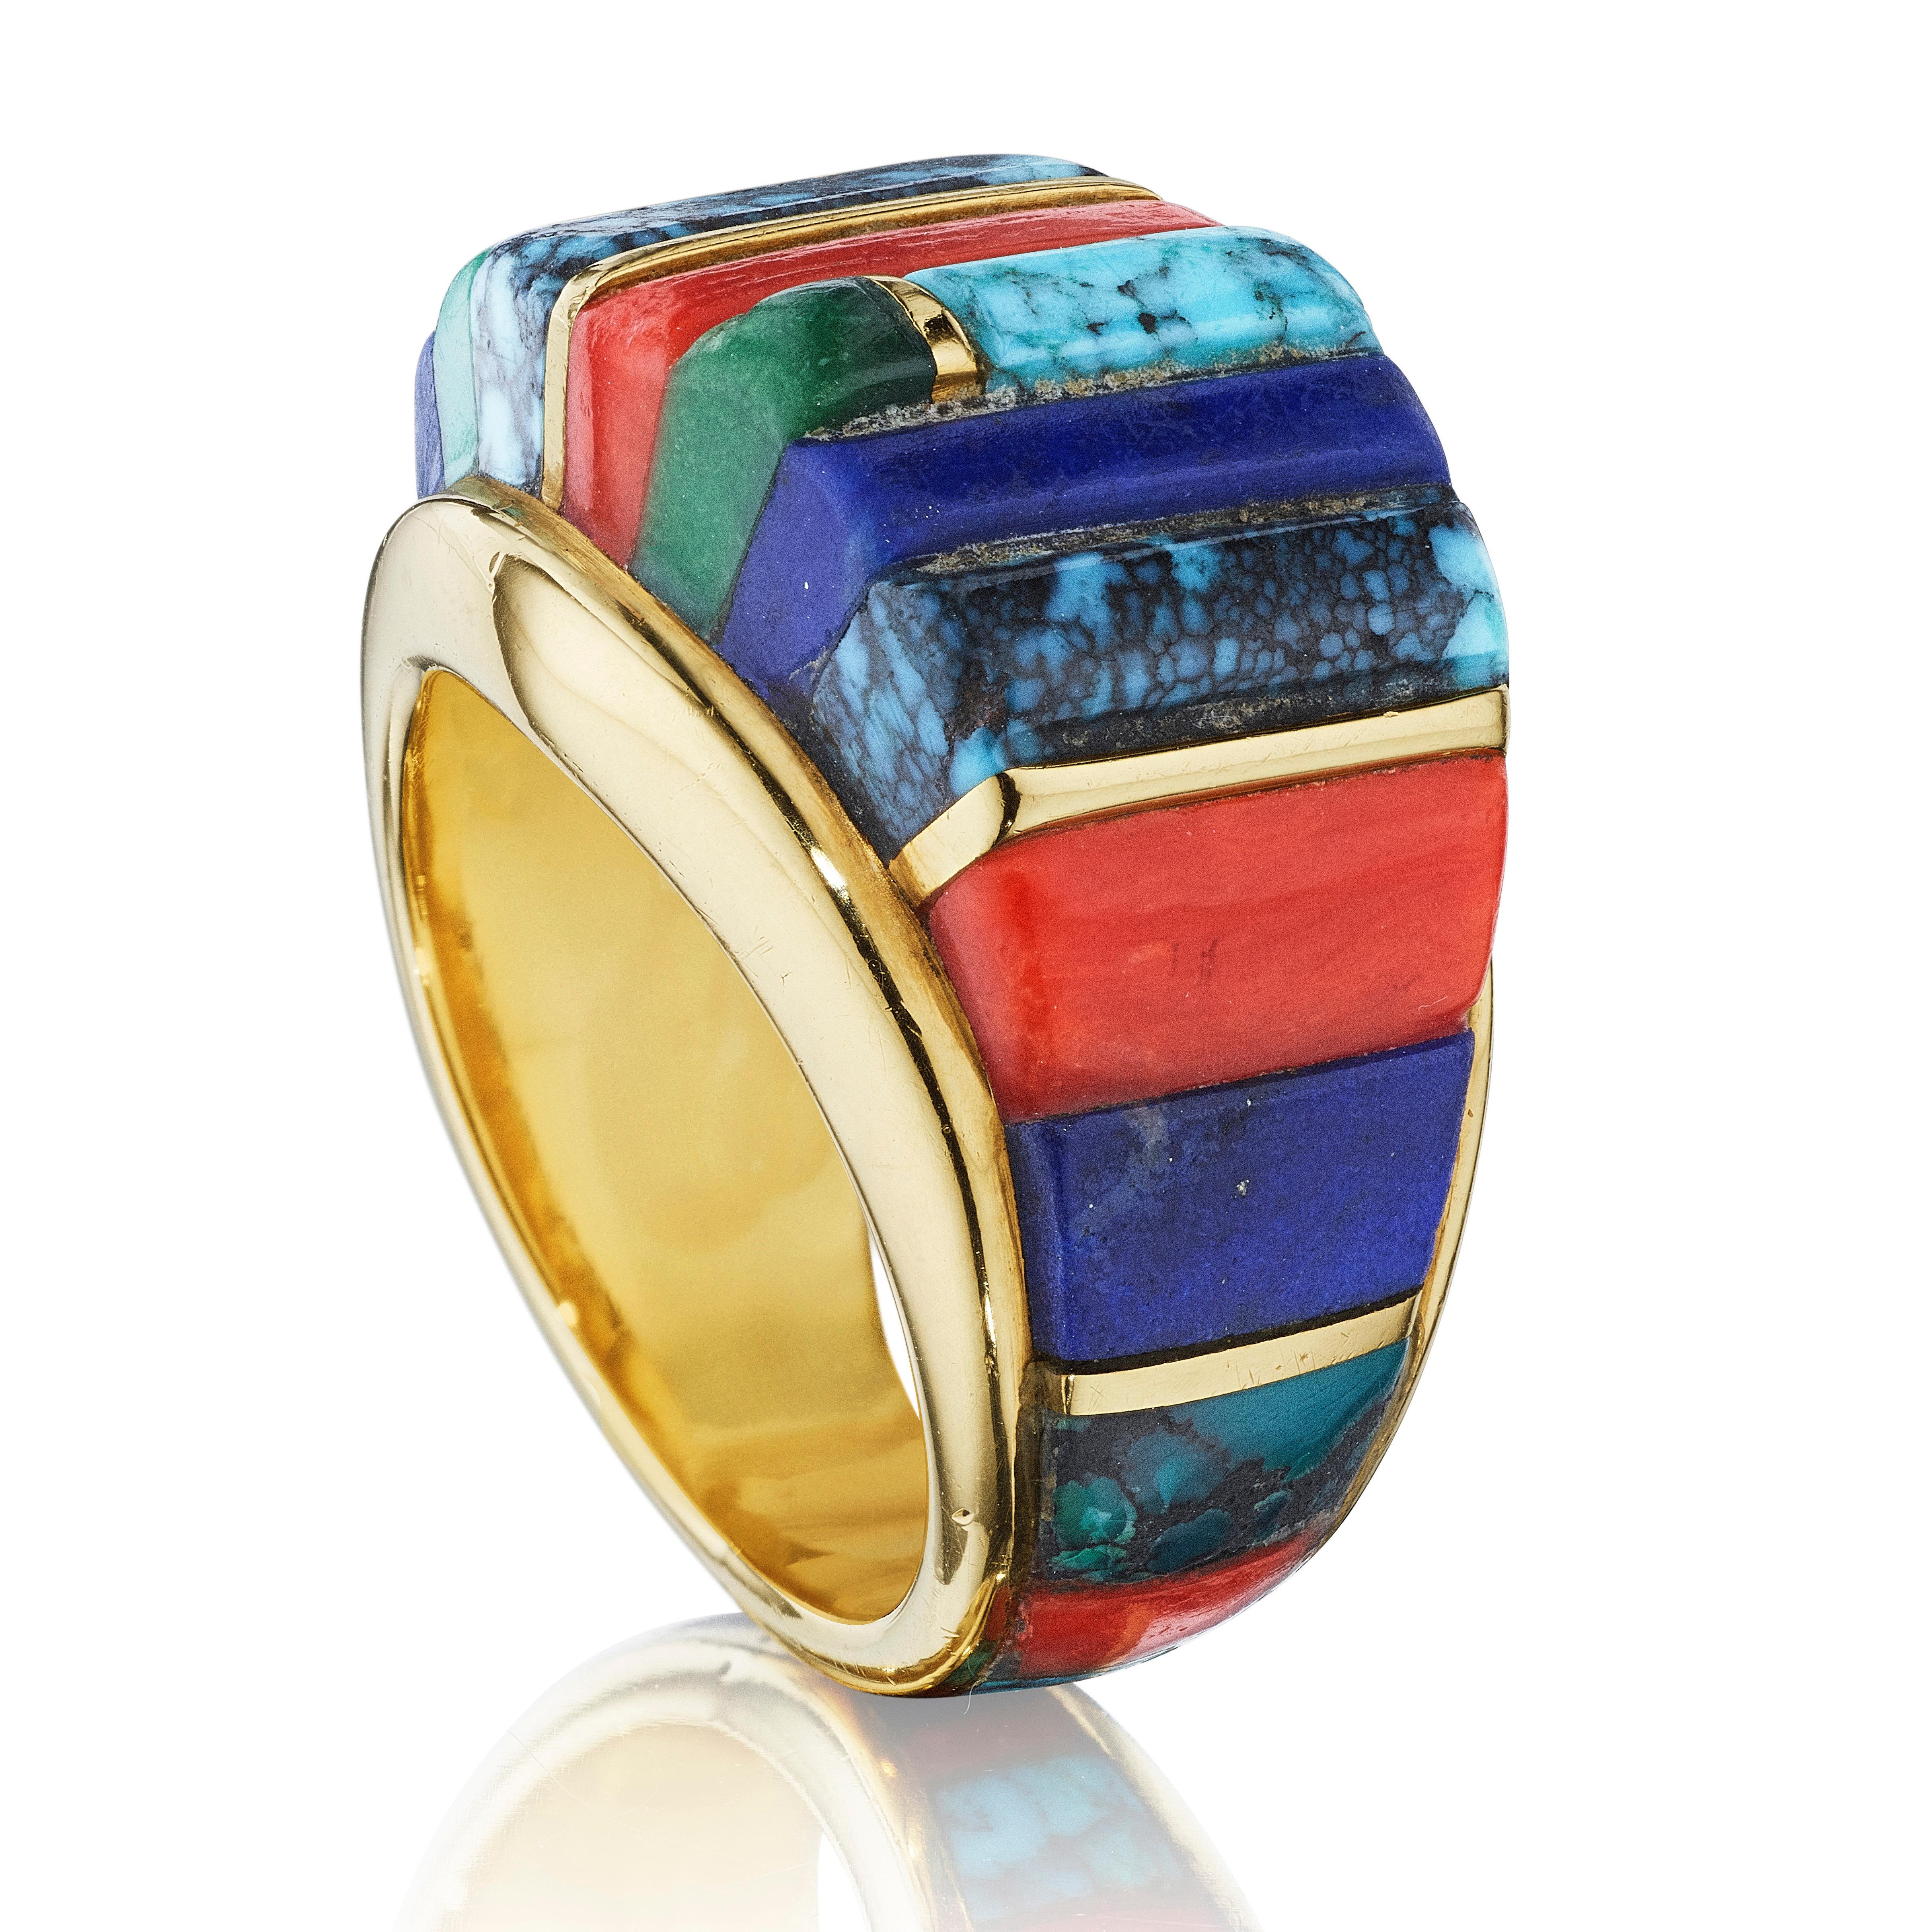 A ring of stacked turquoise, coral, lapis lazuli, malachite, and gold; mounted in 18-karat gold
• Signed Loloma
• Ring Size: 5½

Charles Loloma is the finest Native American jeweler of the twentieth century. In the 1960s and 1970s, he created